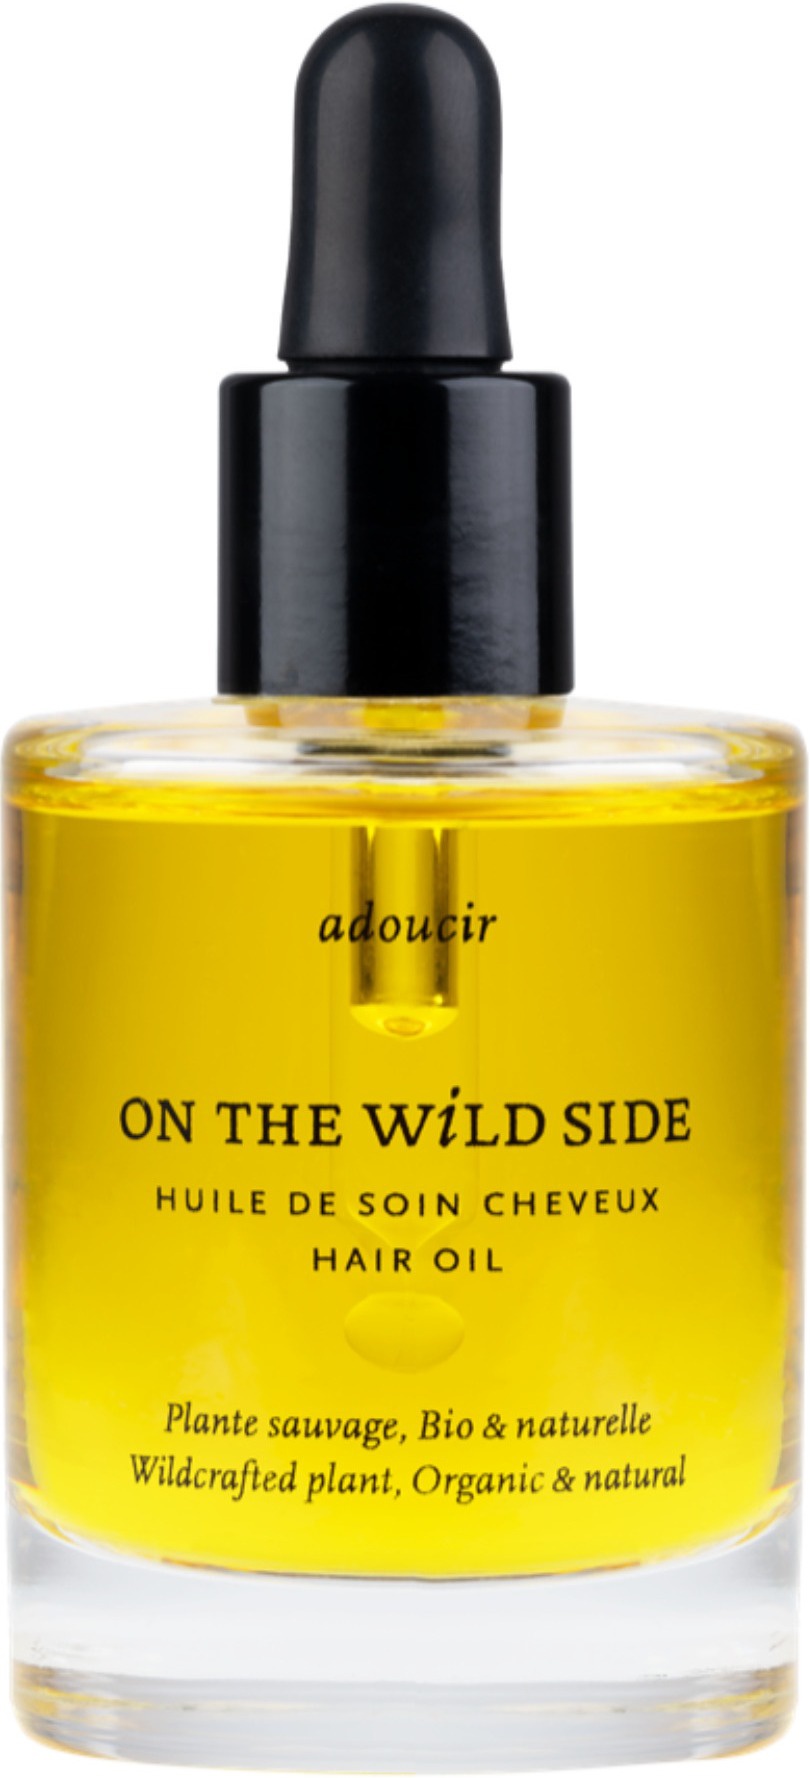 ON THE WILD SIDE Hair Oil